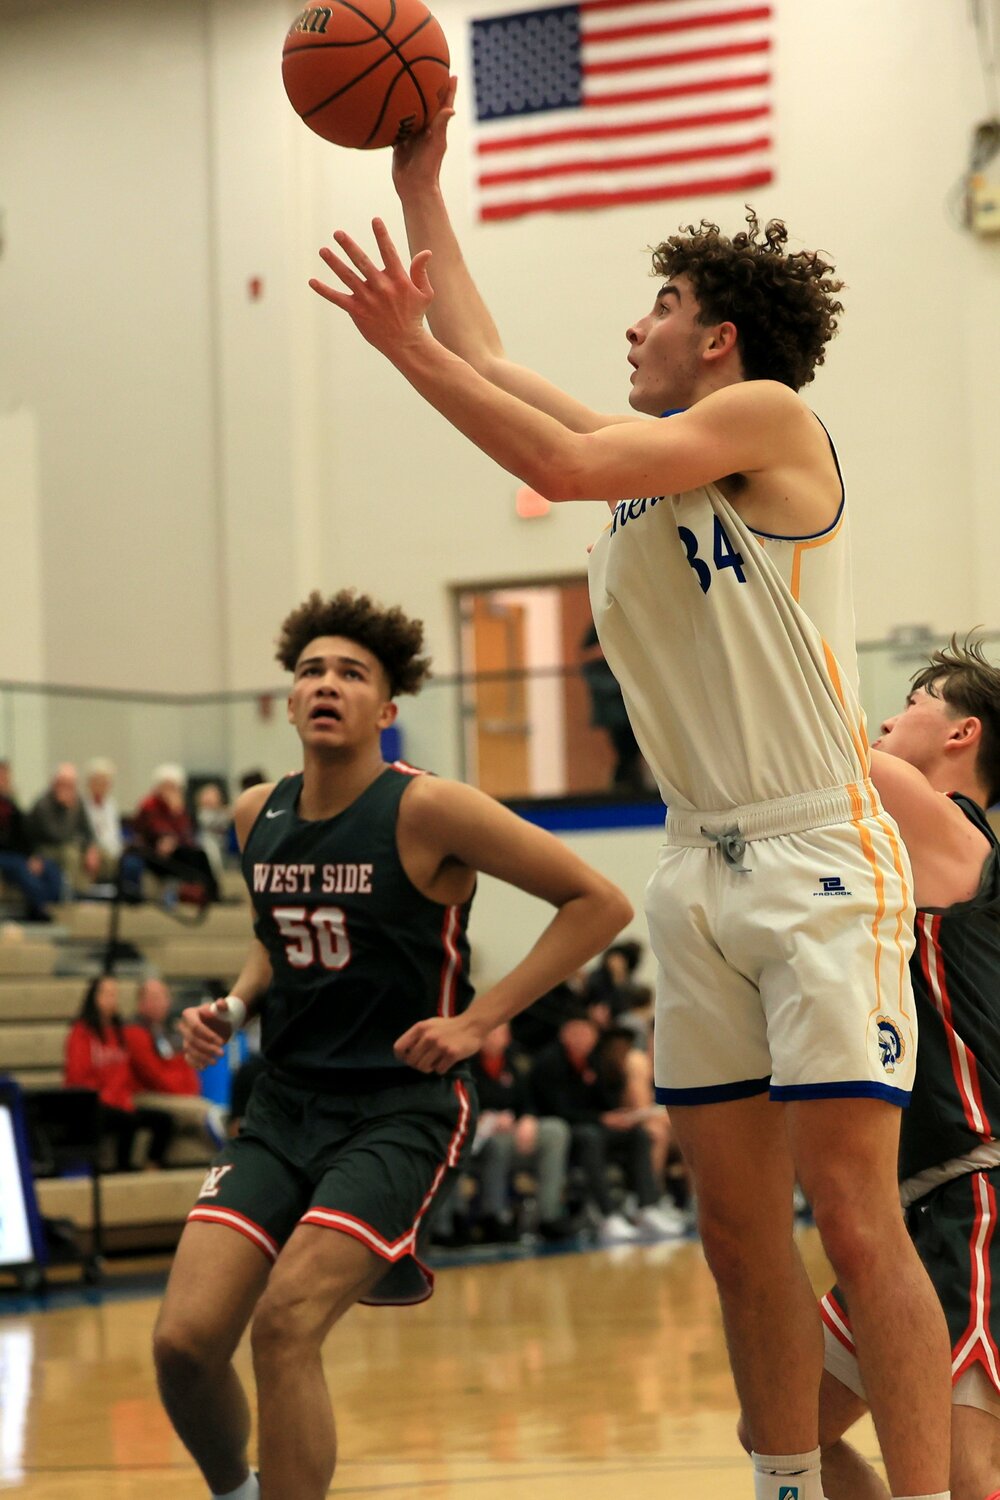 Junior Alec Saidian had his best game of the young season for CHS with a 25 point, 12 rebound effort in the Athenians narrow 64-62 loss to West Lafayette on Friday.